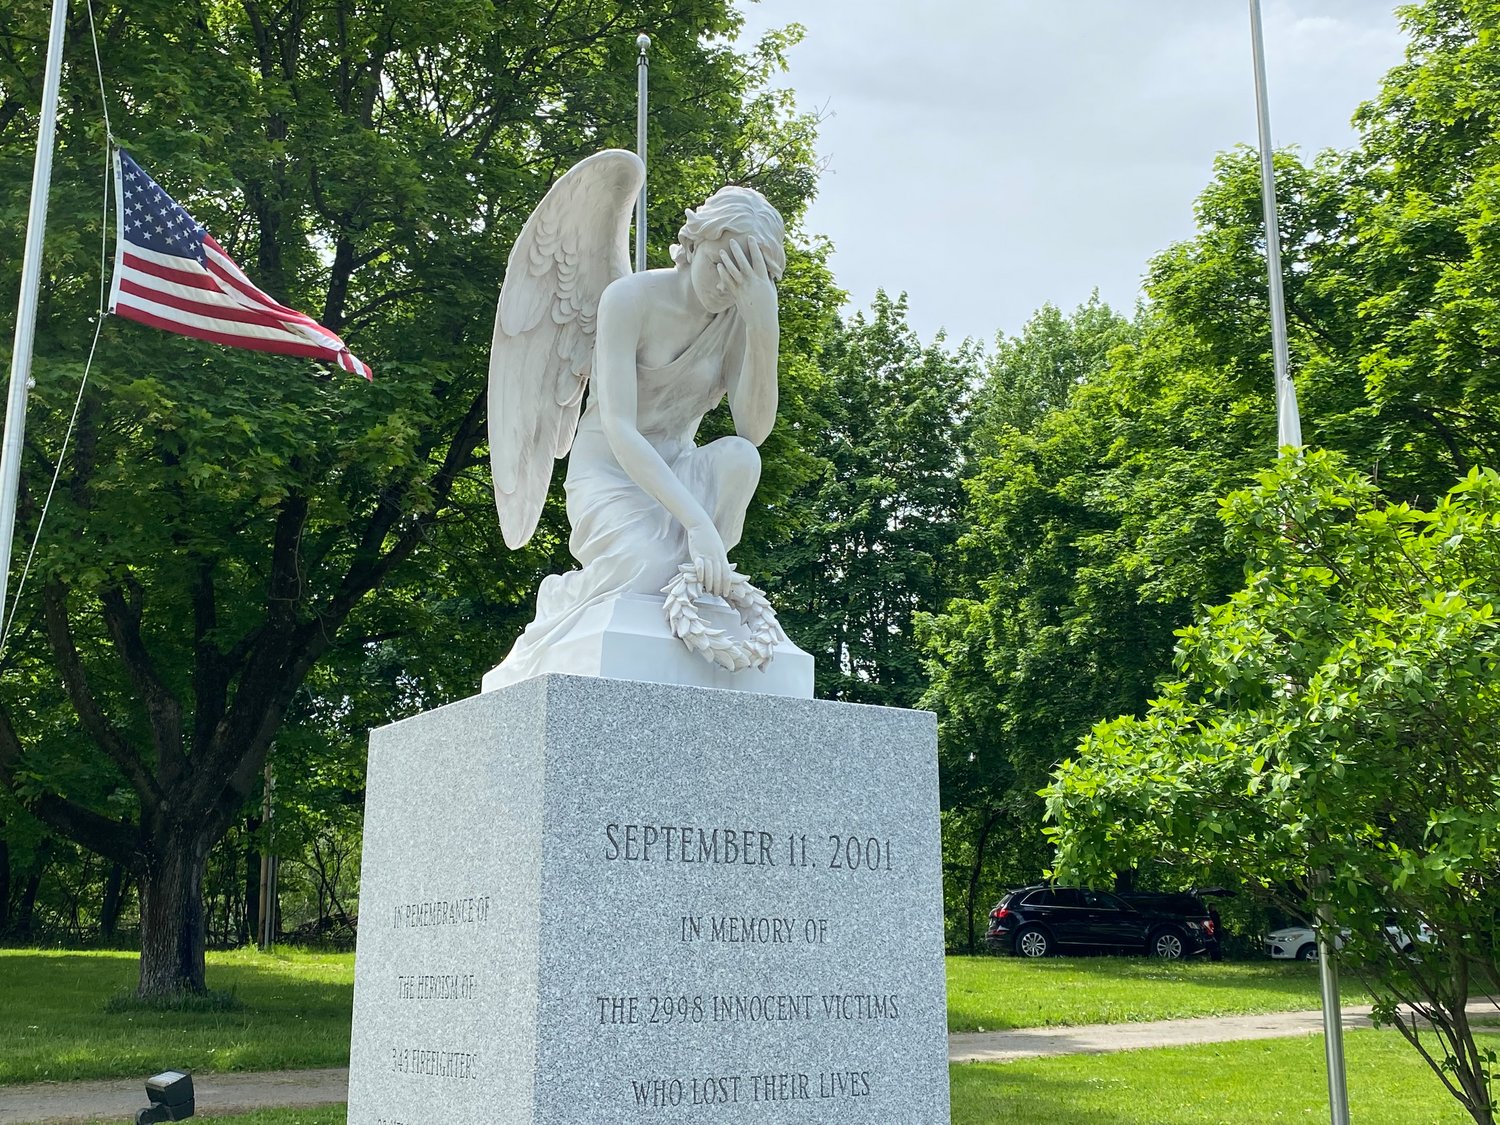 The 9/11 memorial located at the intersection of Memorial Parkway and Sherman Drive in Utica.